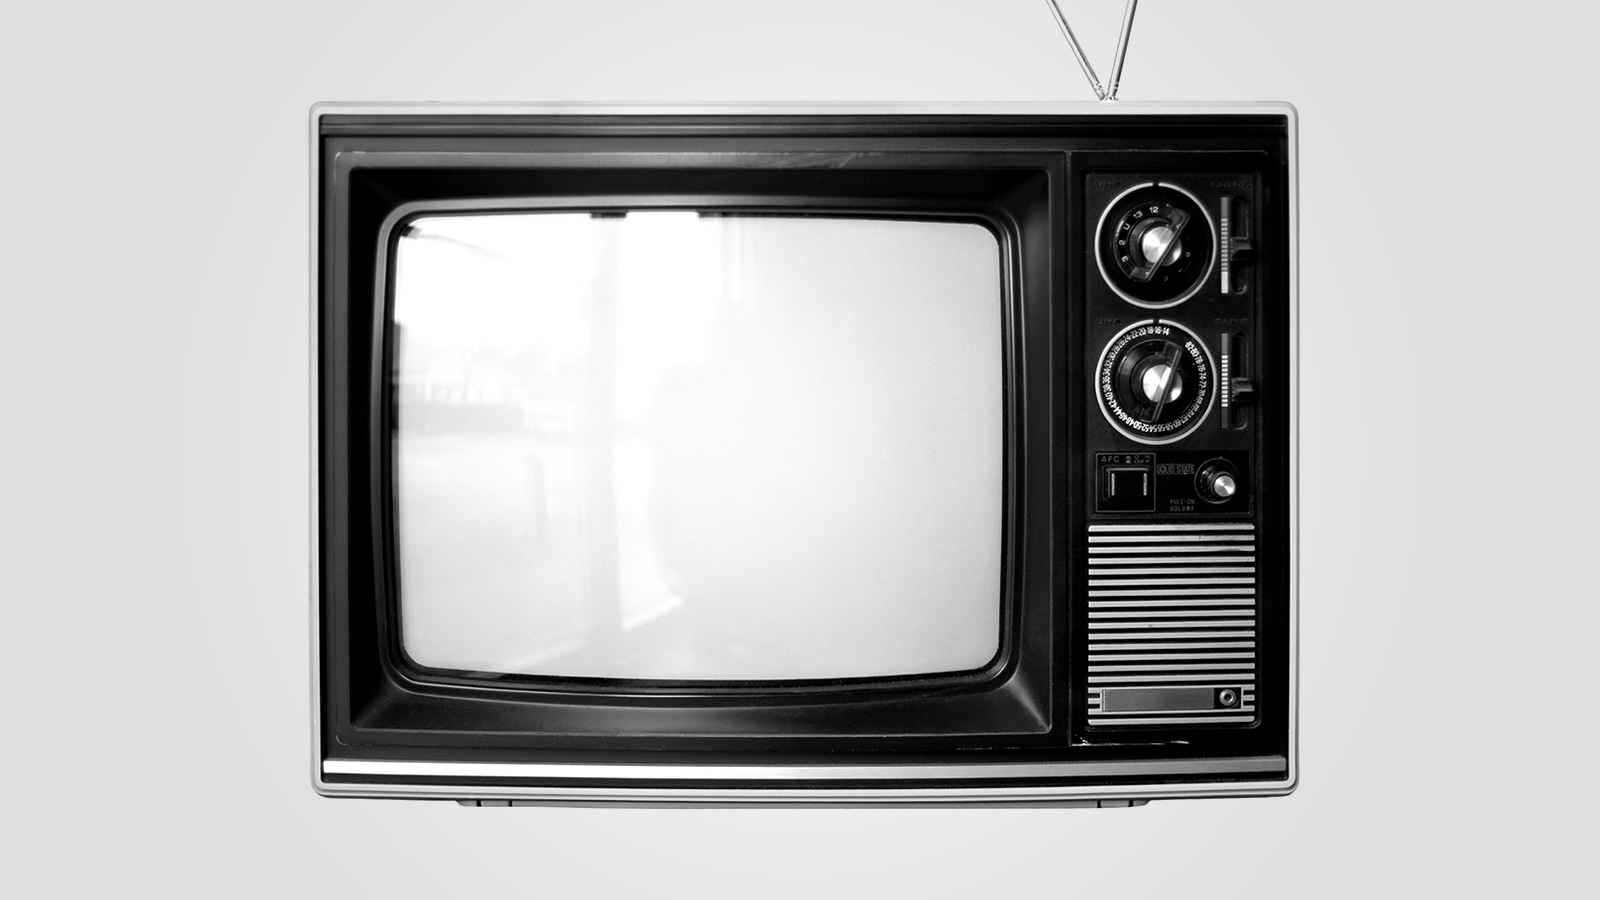 A 1970s-era TV with dials and rabbit-ears antenna